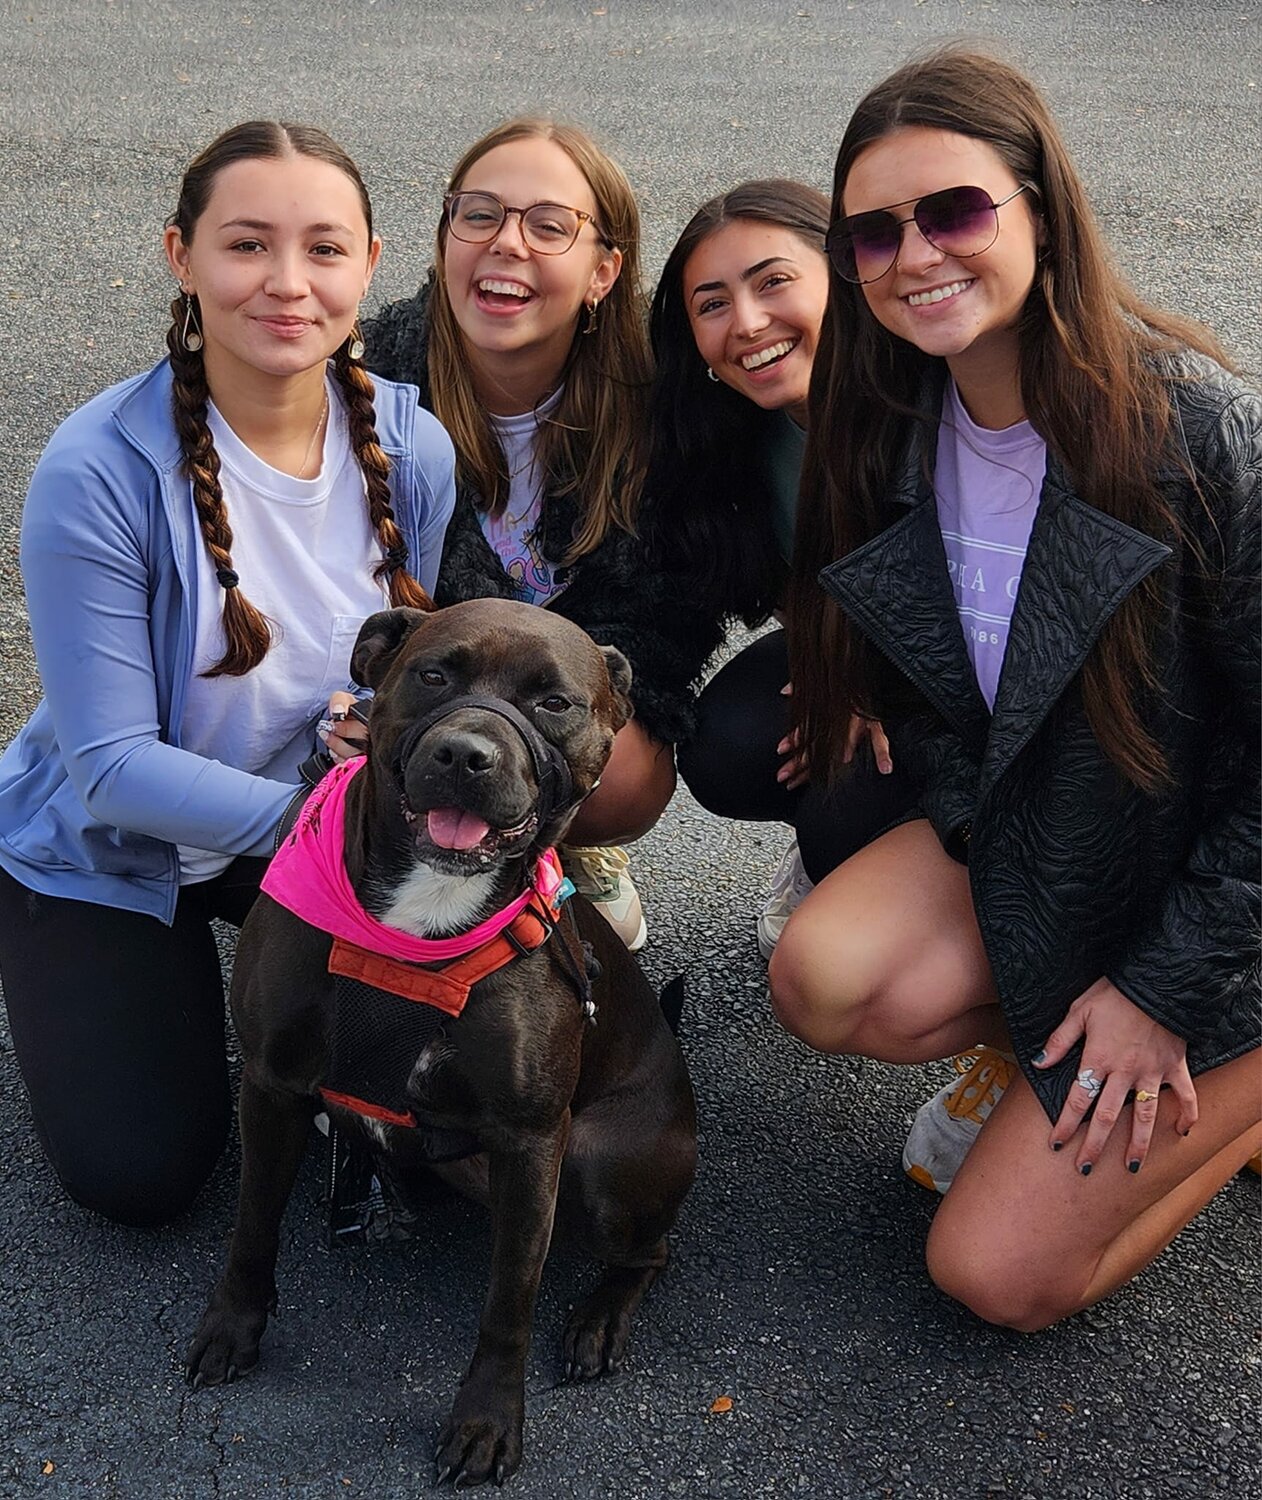 Members of Phi Alpha Omega spending time with Sweetie during the adoption event.